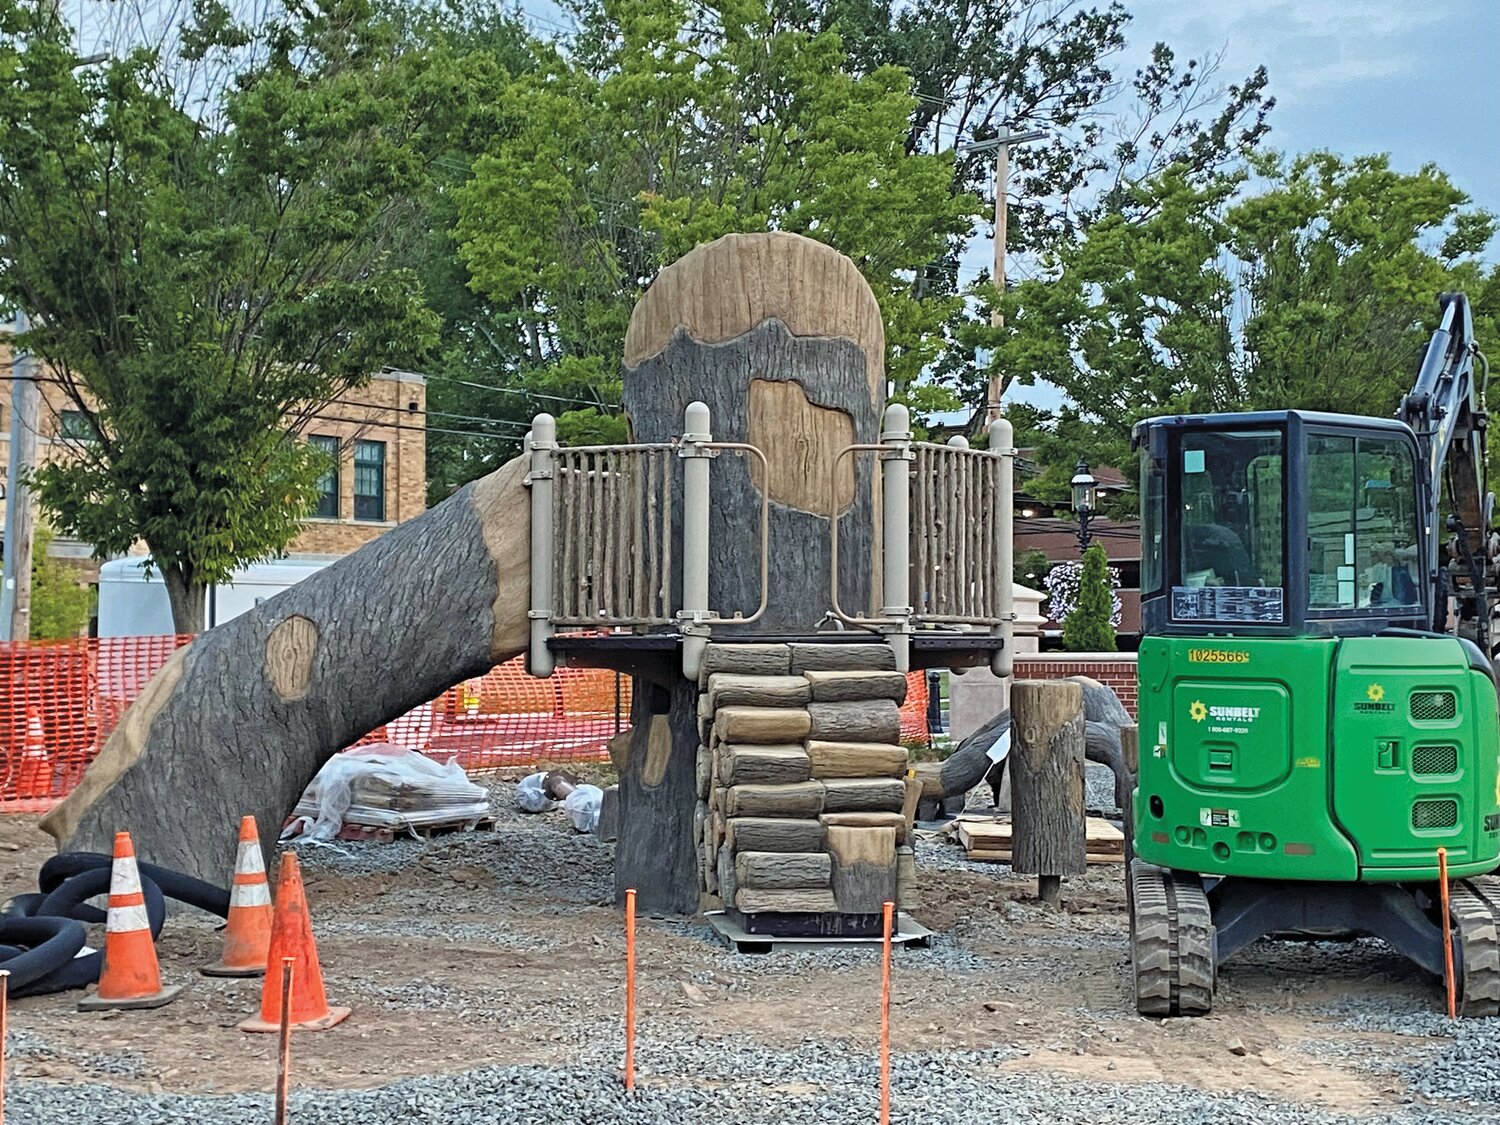 A sliding board designed to look like the trunk of a large tree will be part of the play elements at Broad Commons Park in Doylestown.